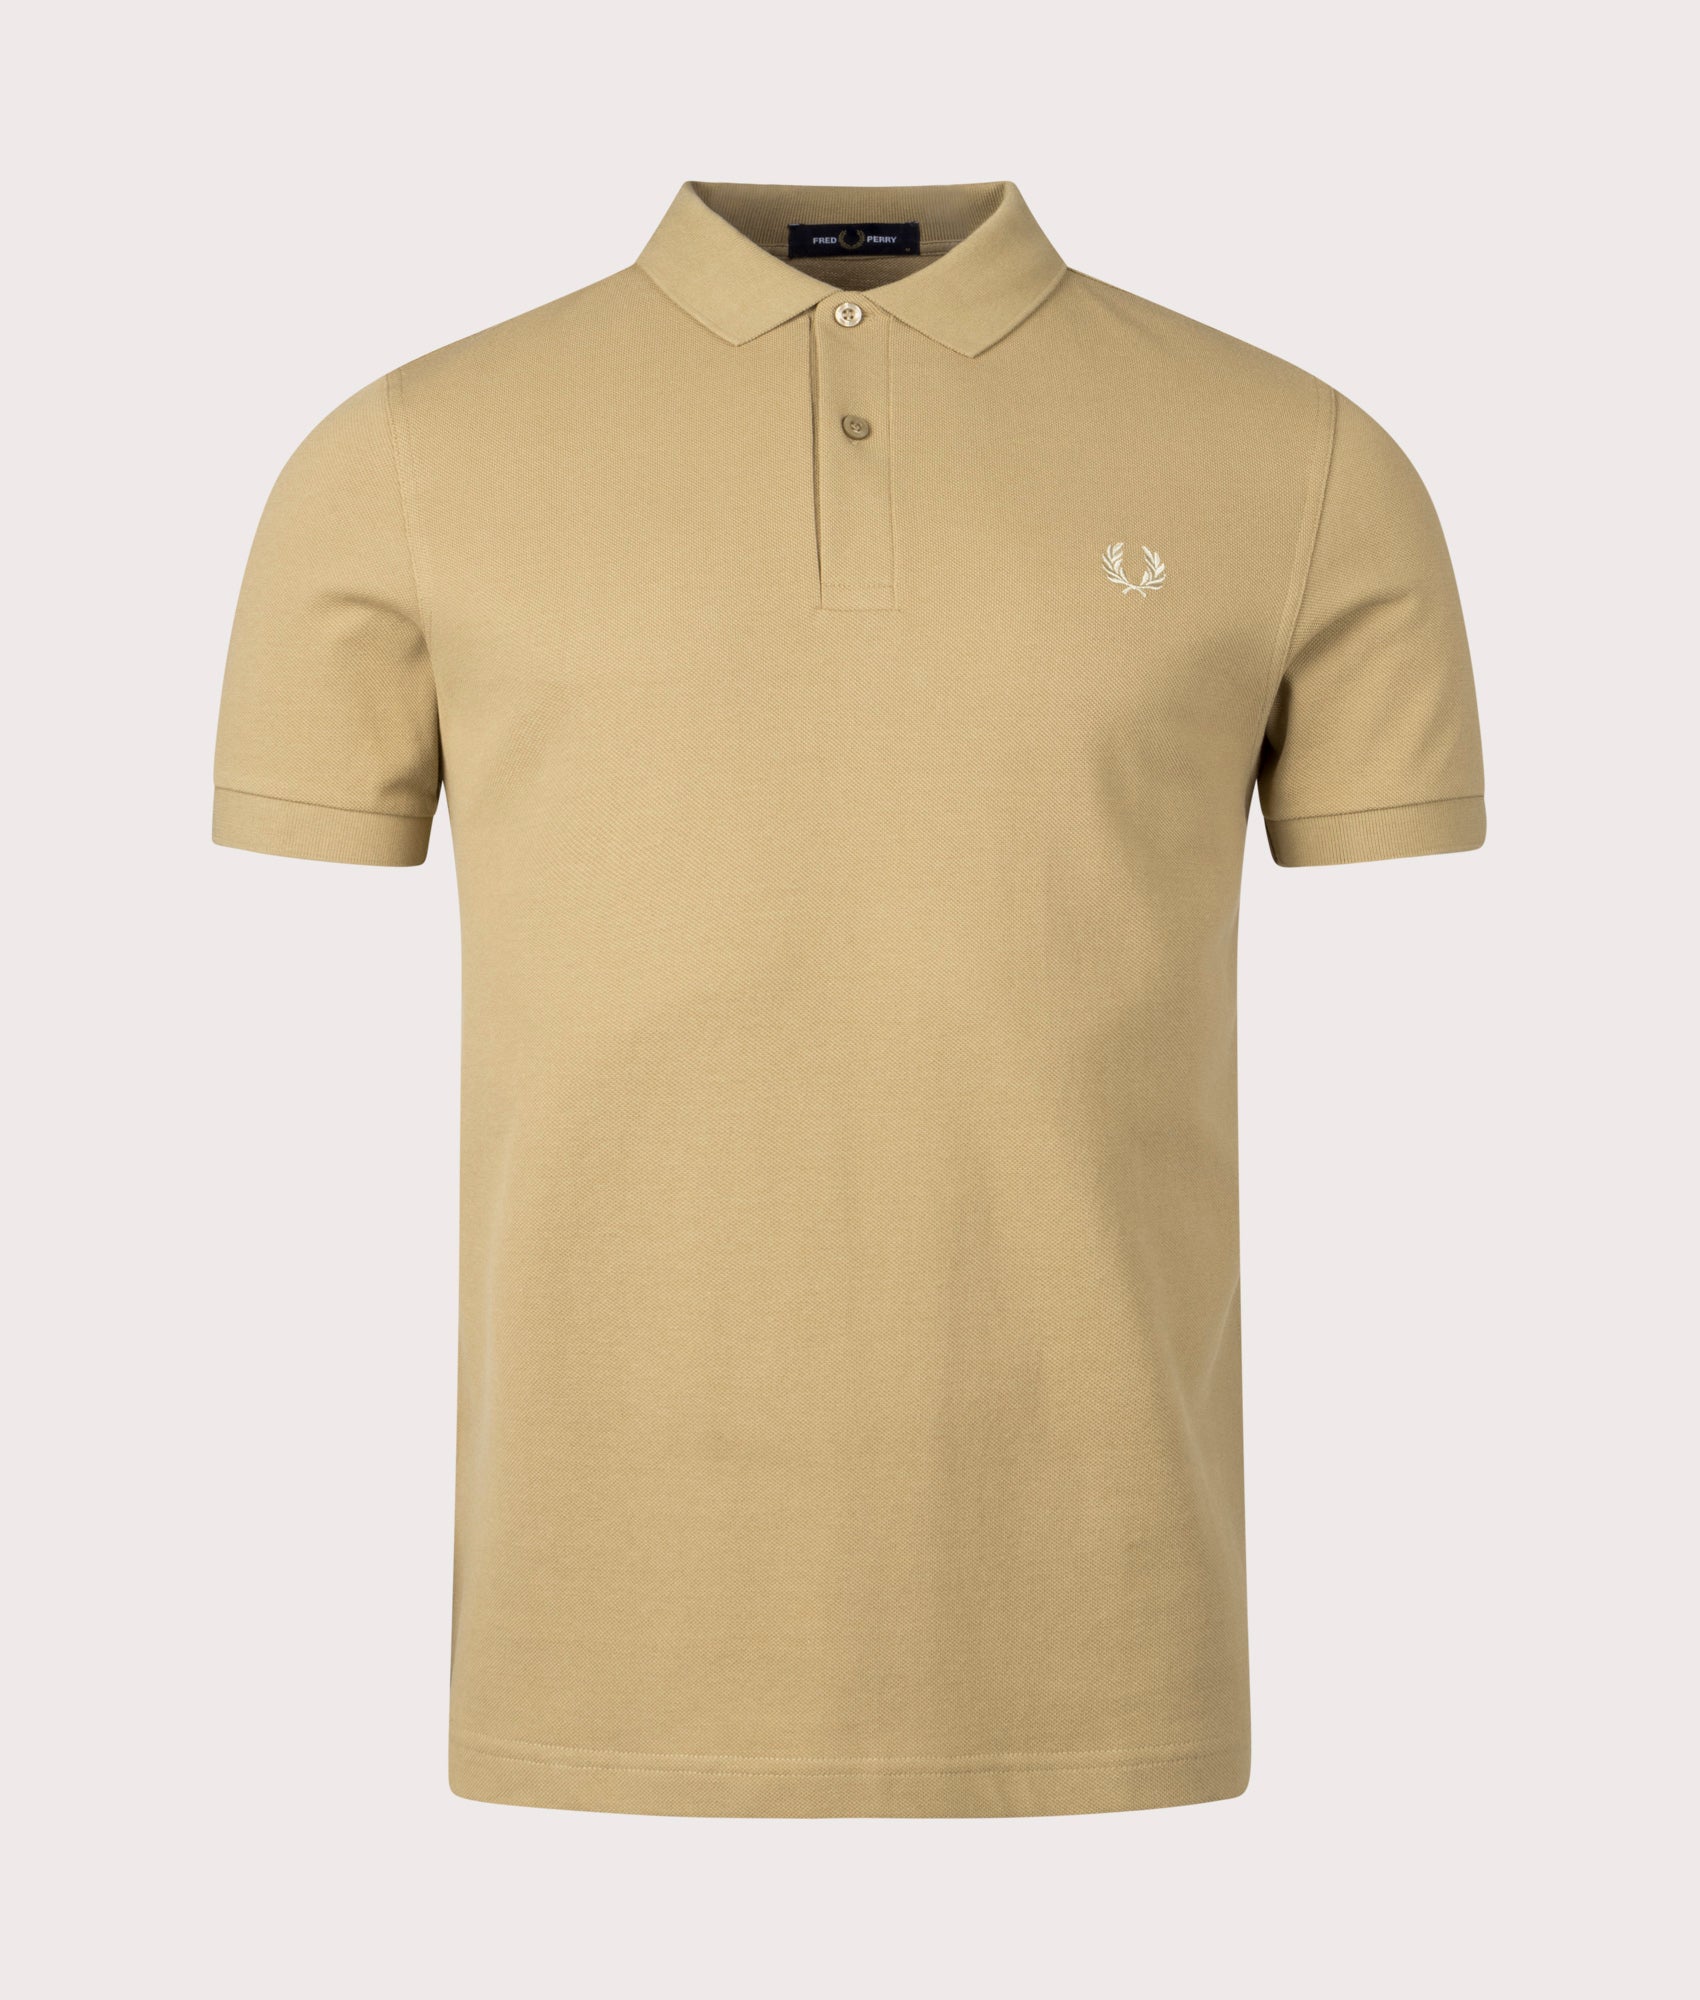 Fred Perry Mens Plain Fred Perry Polo Shirt - Colour: V19 Warm Stone/Oatmeal - Size: Medium